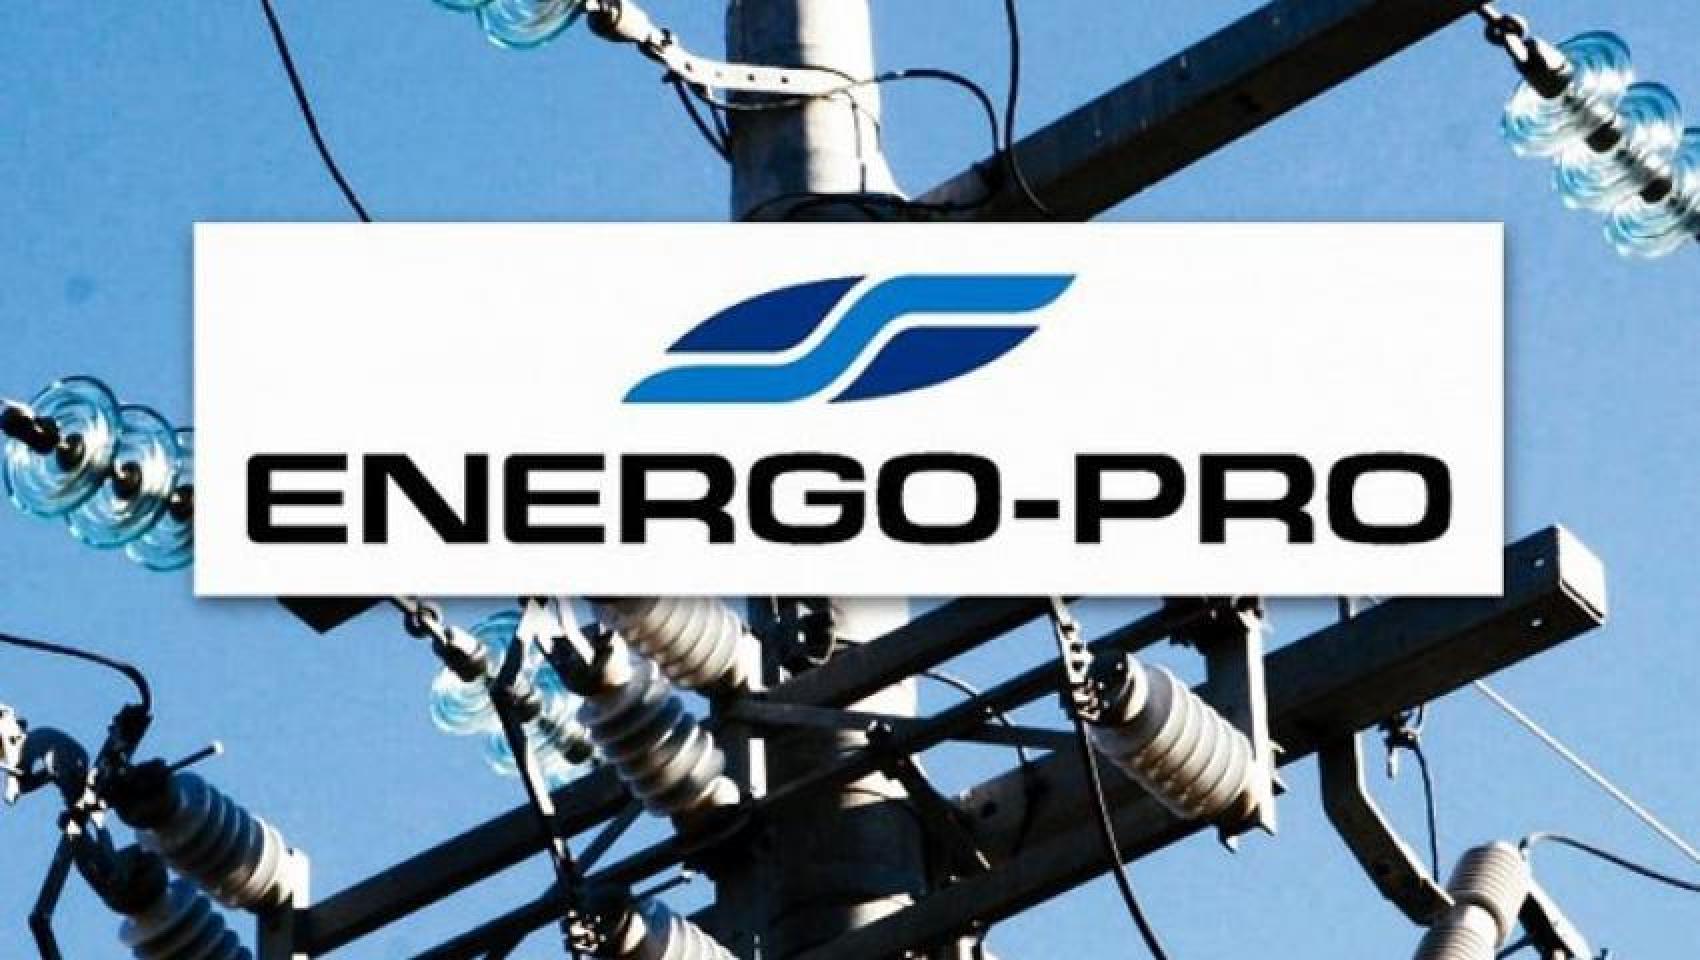 Customers of ENERGO-PRO report a telephone scam in which the